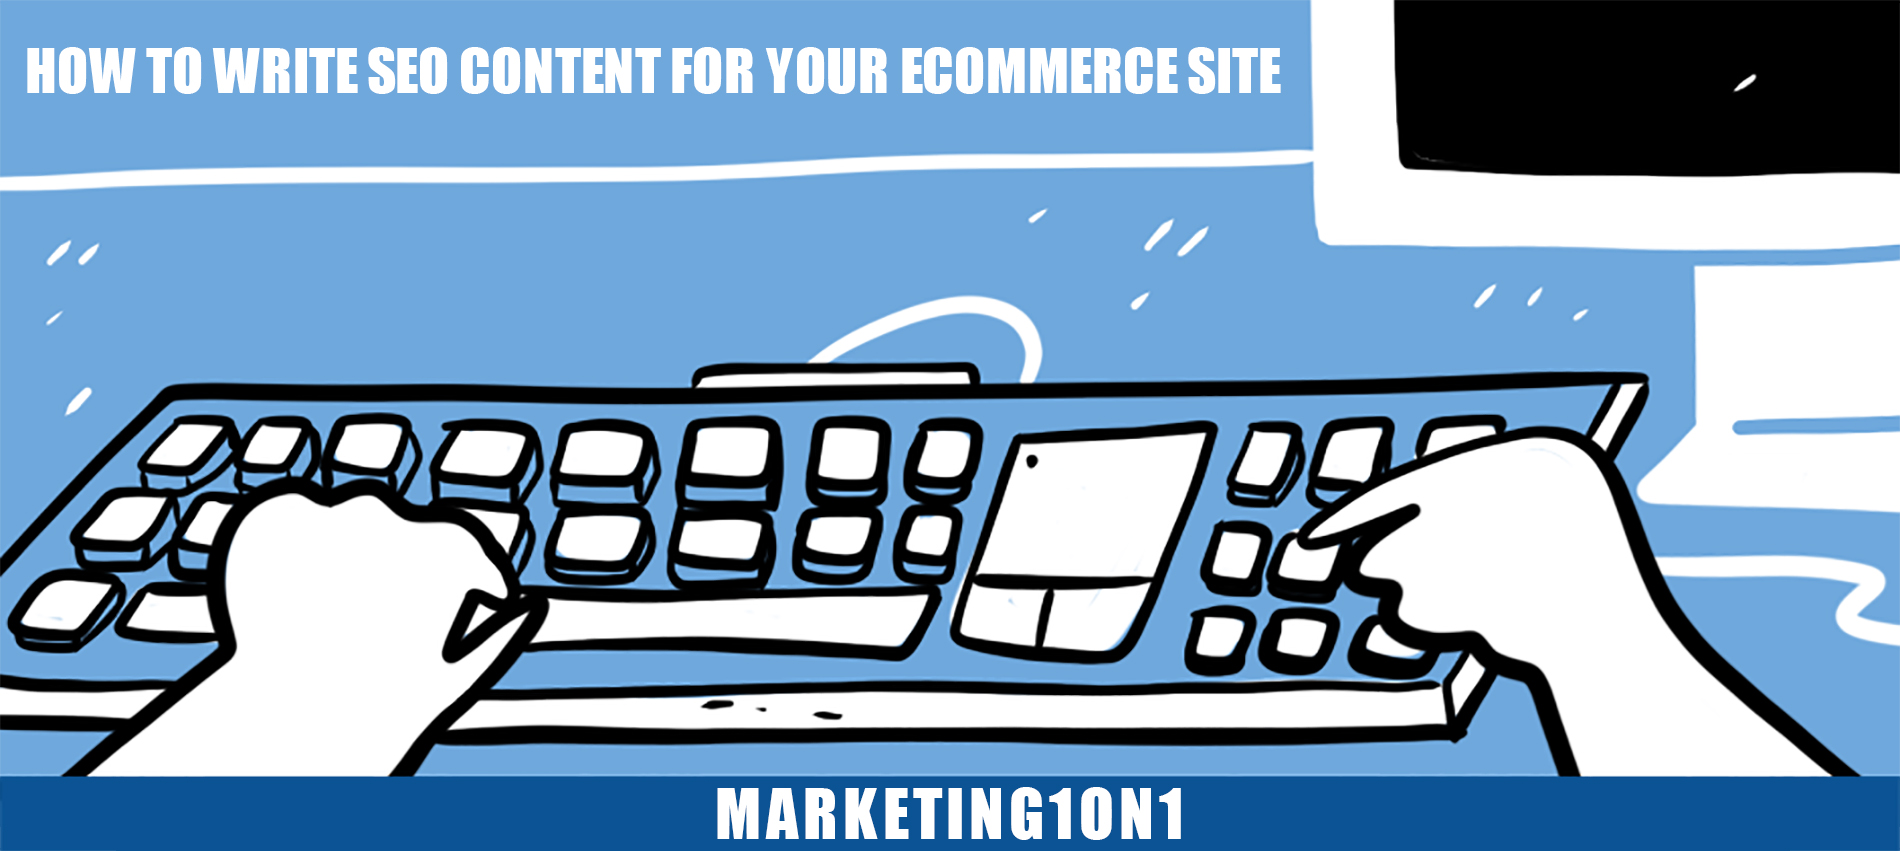 How to write SEO content for your eCommerce site?